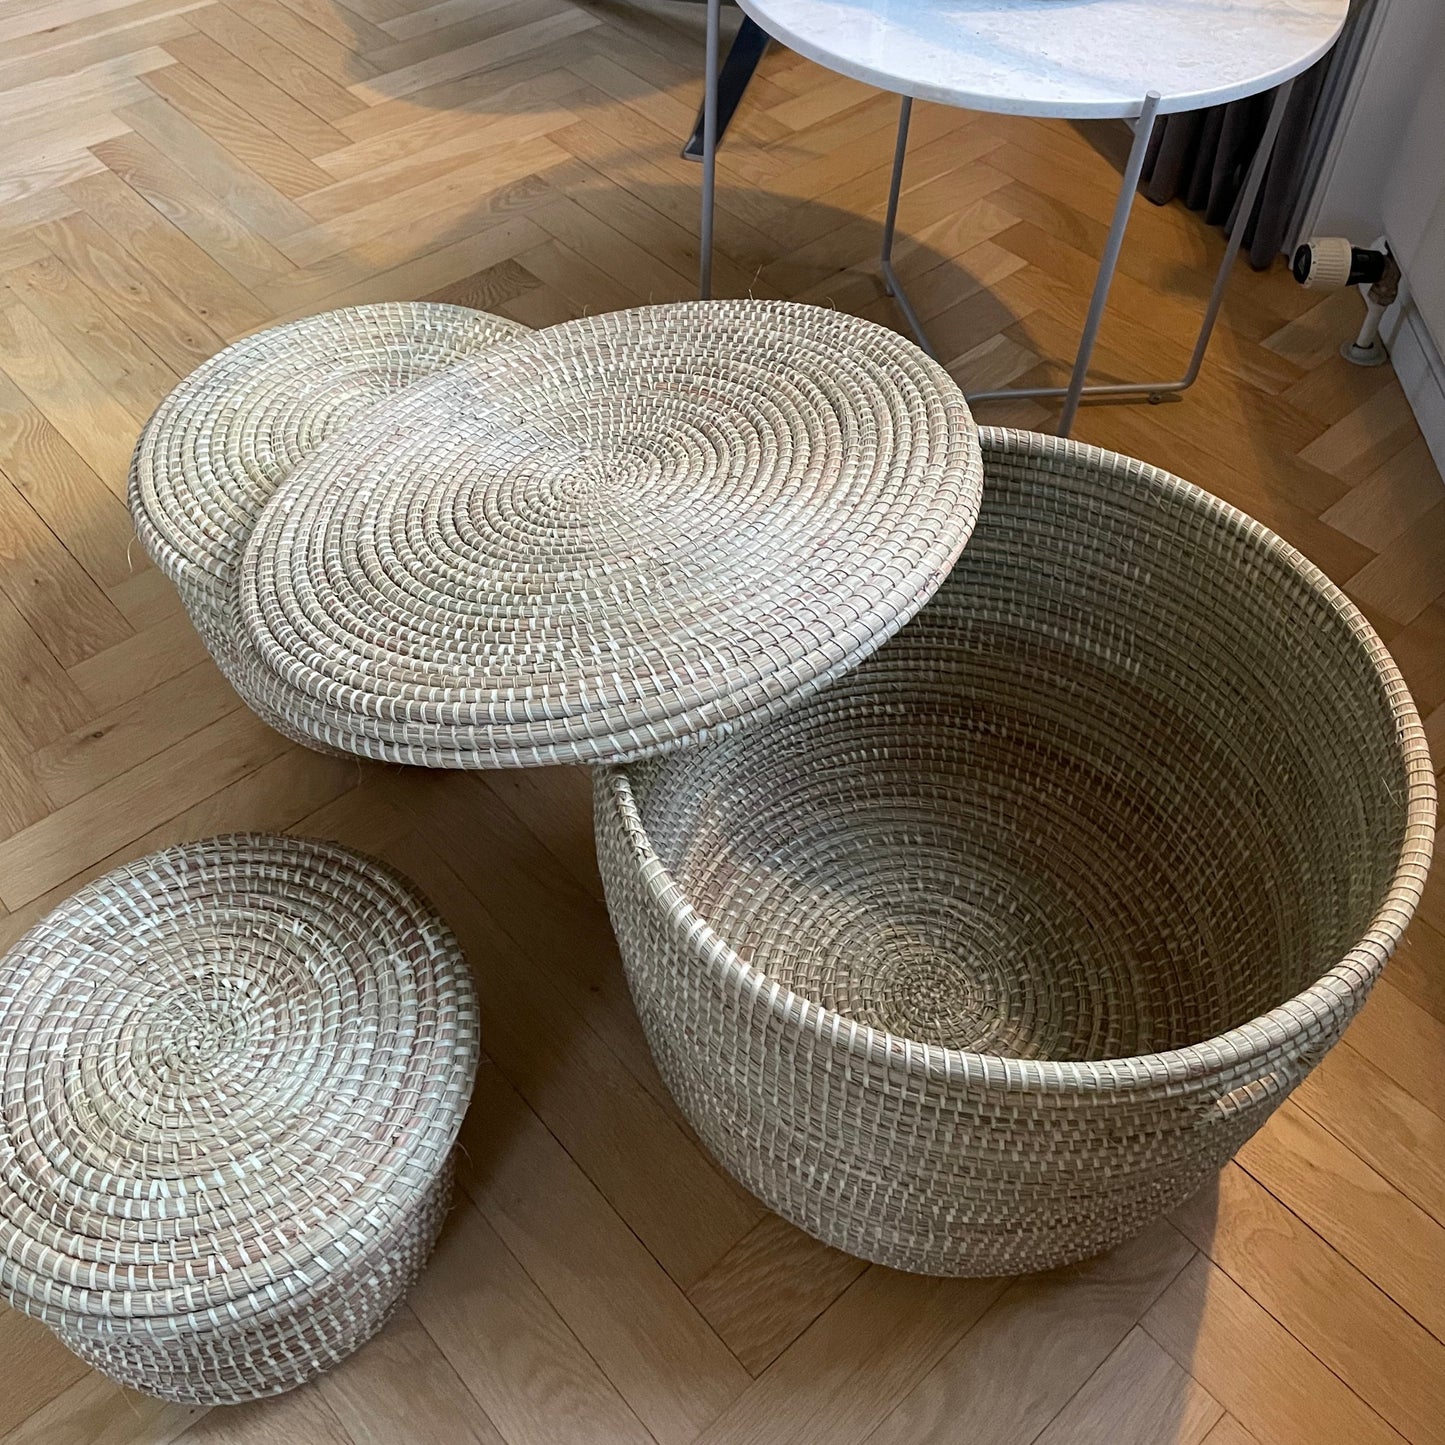 Laundry basket (coffee table) hand-woven elephant grass with lid. Natural color. Three sizes. Fair Trade from Ghana